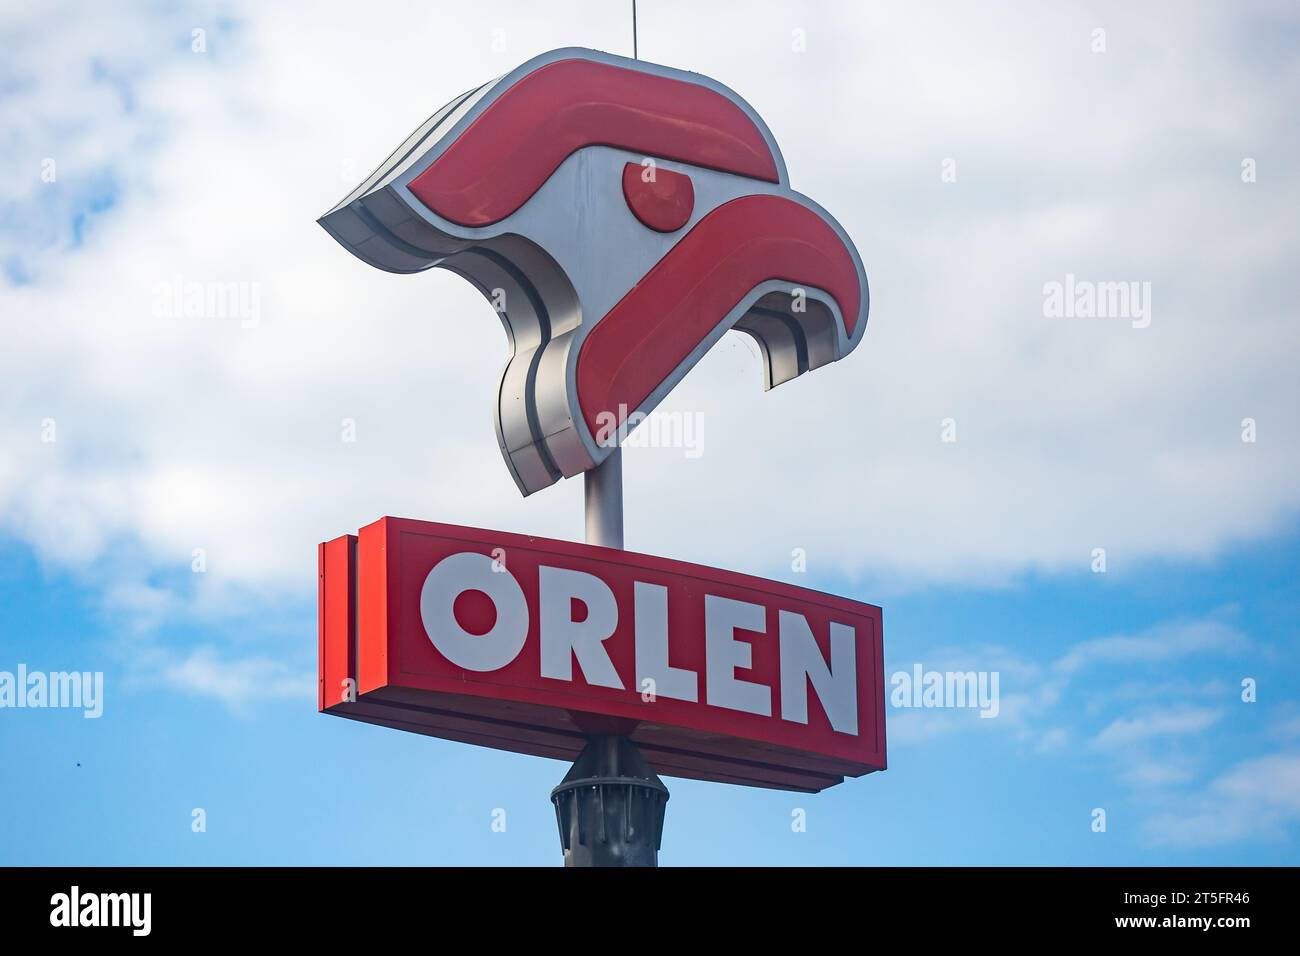 Poznan, Poland - June 11, 2022: Logotype at the Orlen gas station in Poznan, Poland. Stock Photo